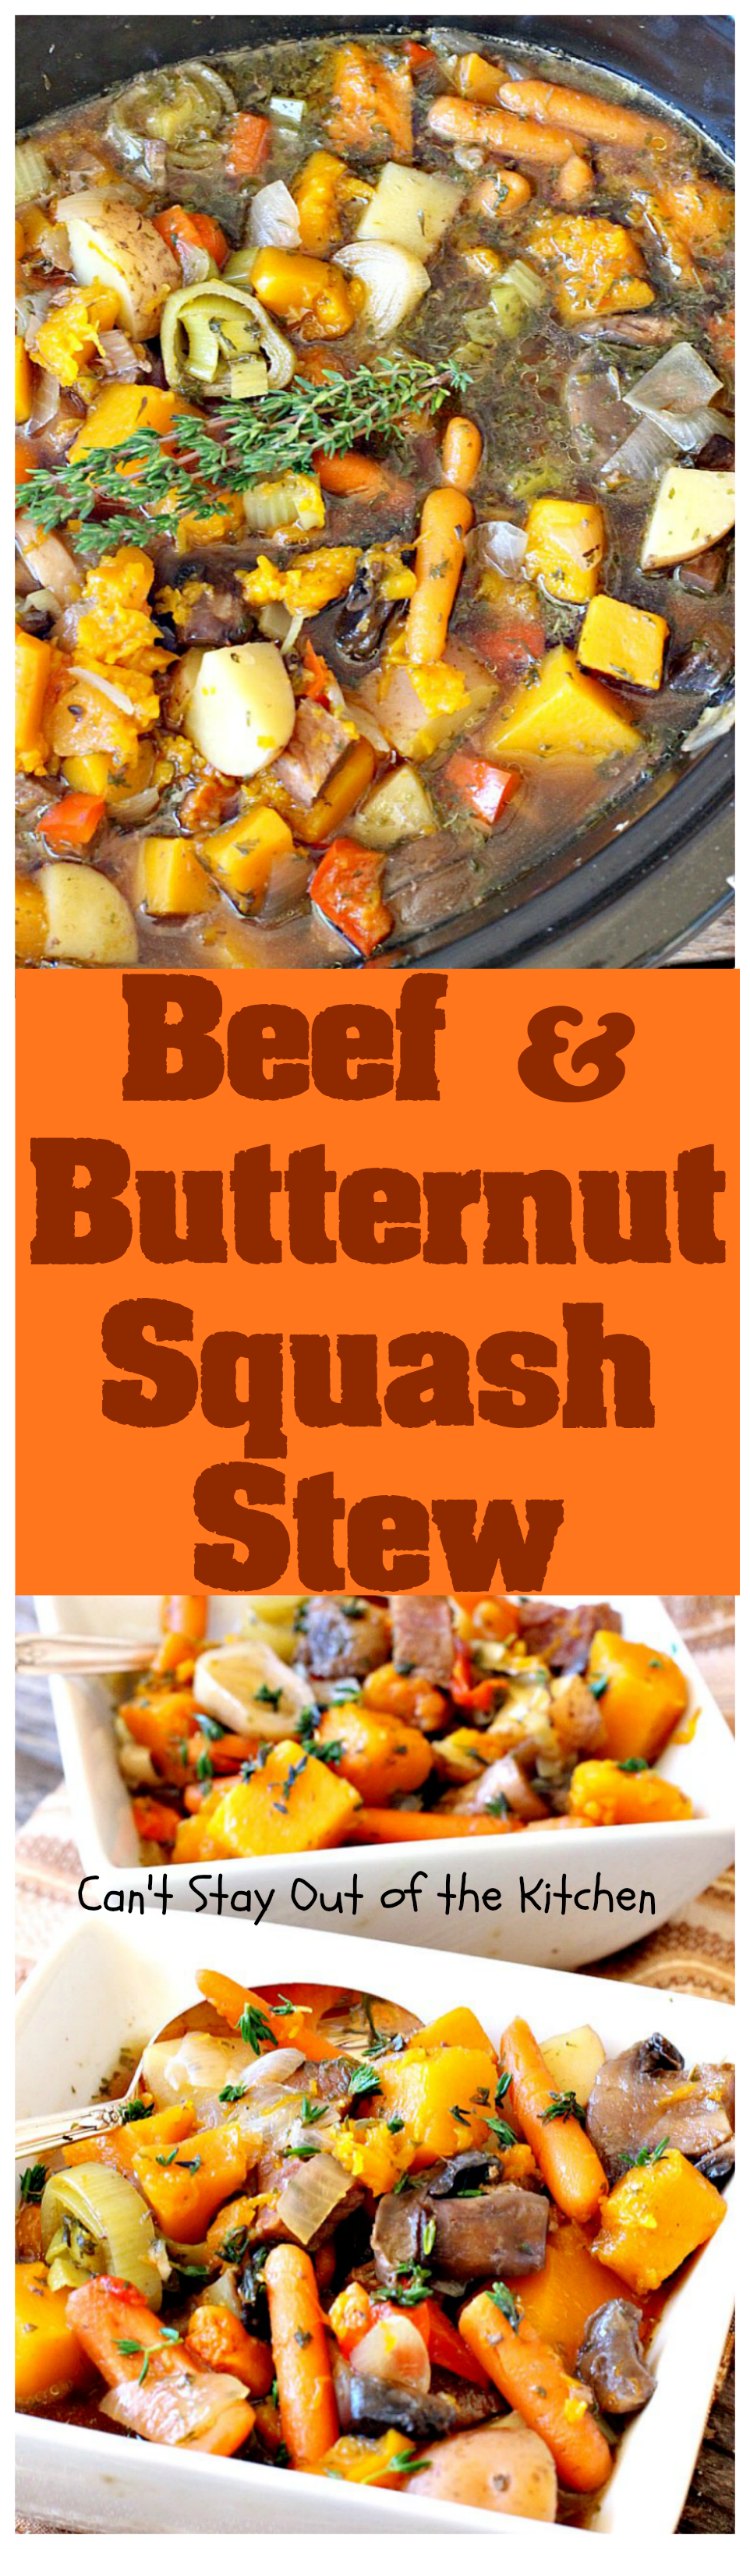 Beef & Butternut Squash Stew | Can't Stay Out of the Kitchen